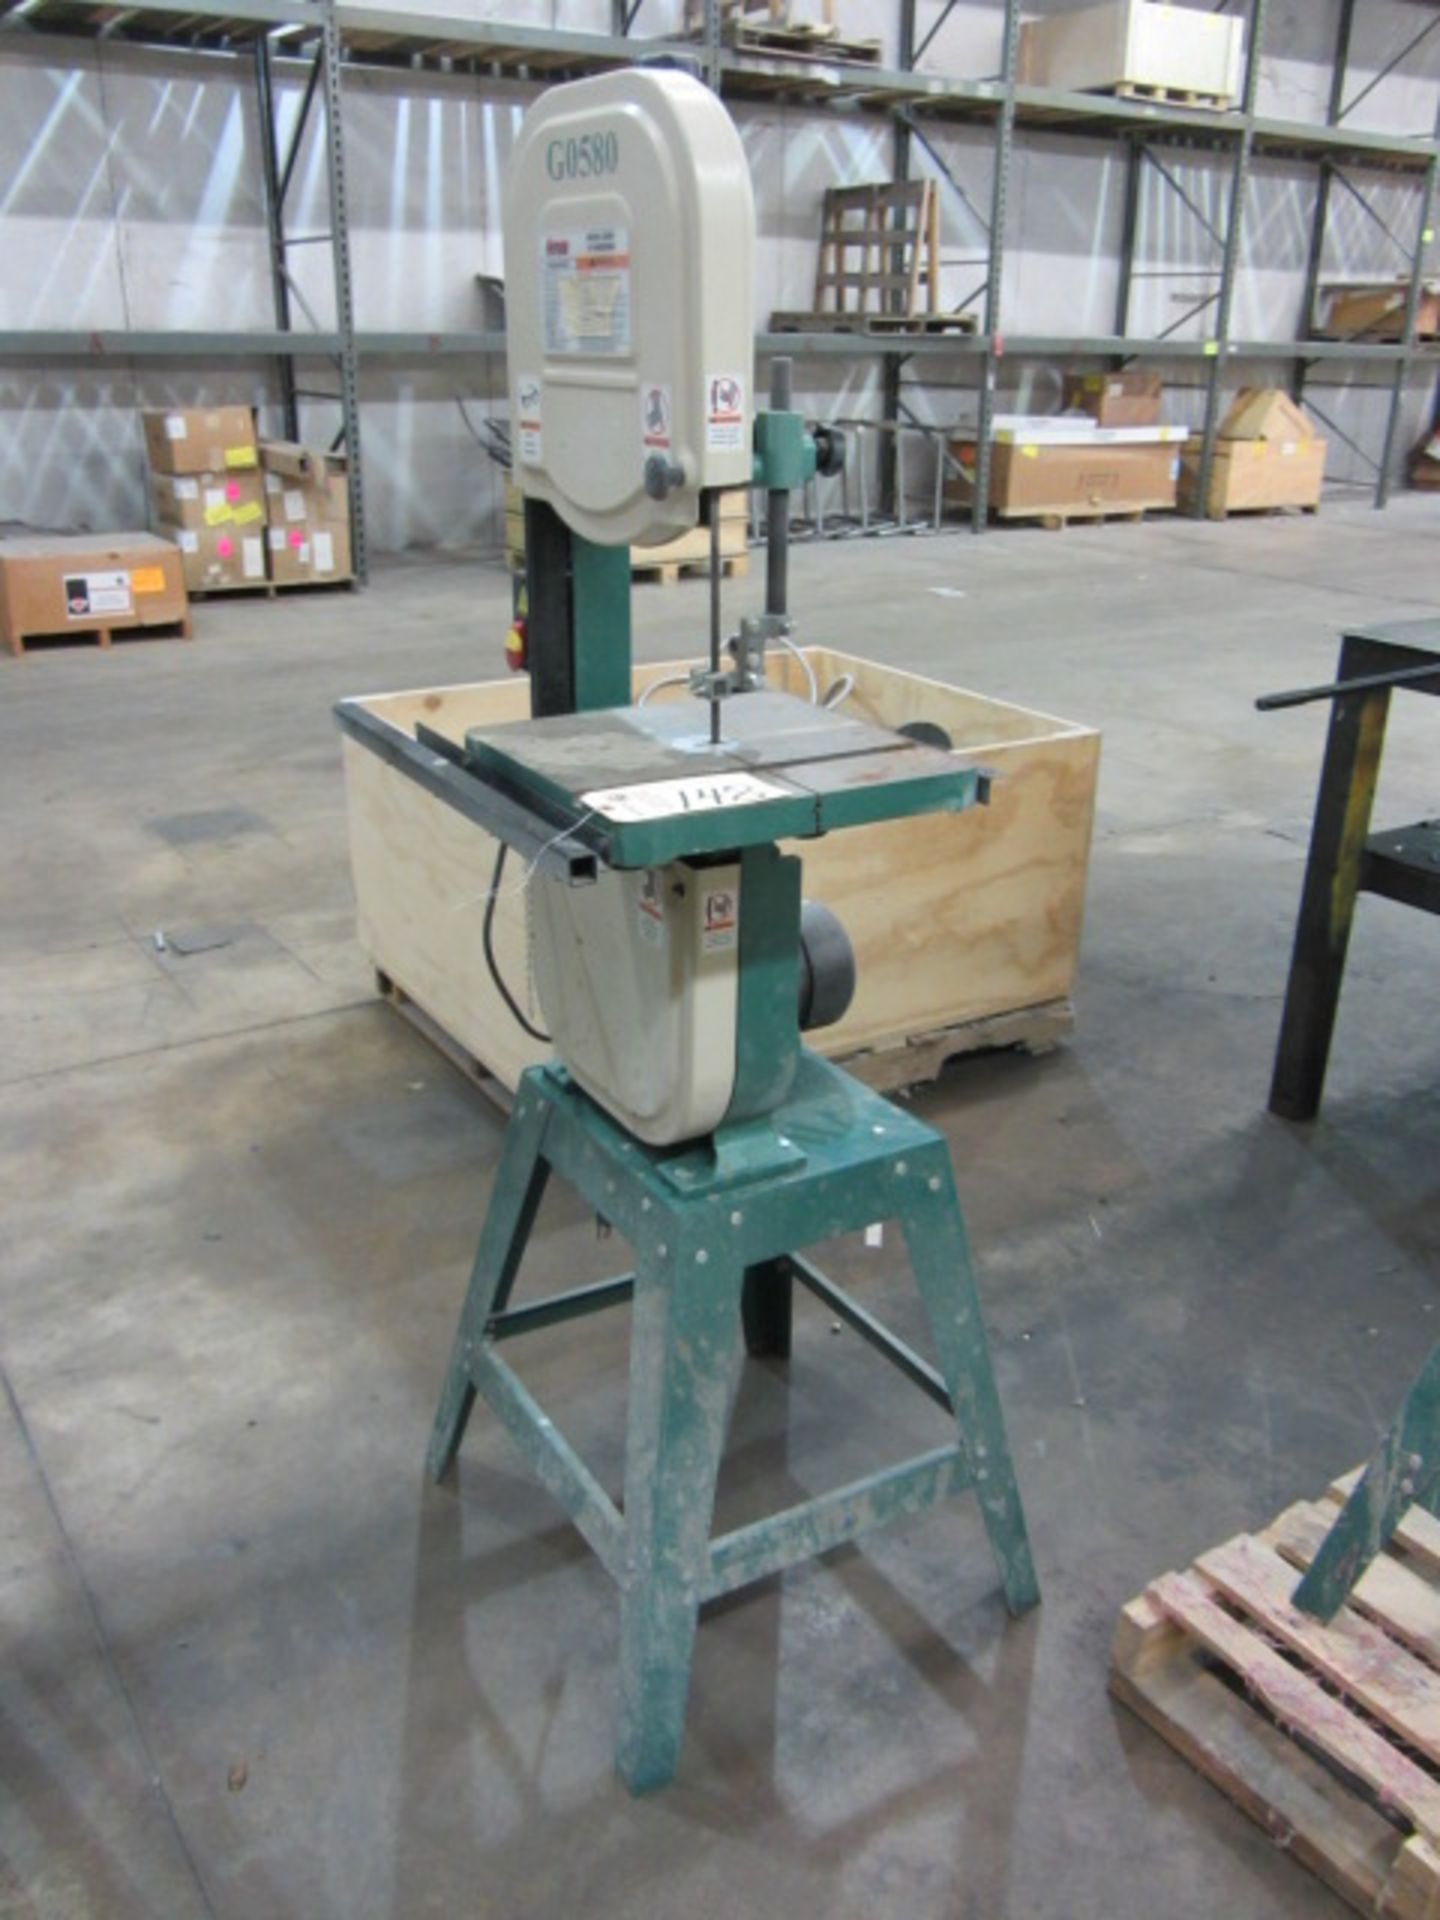 Grizzly G0580 14'' Bandsaw